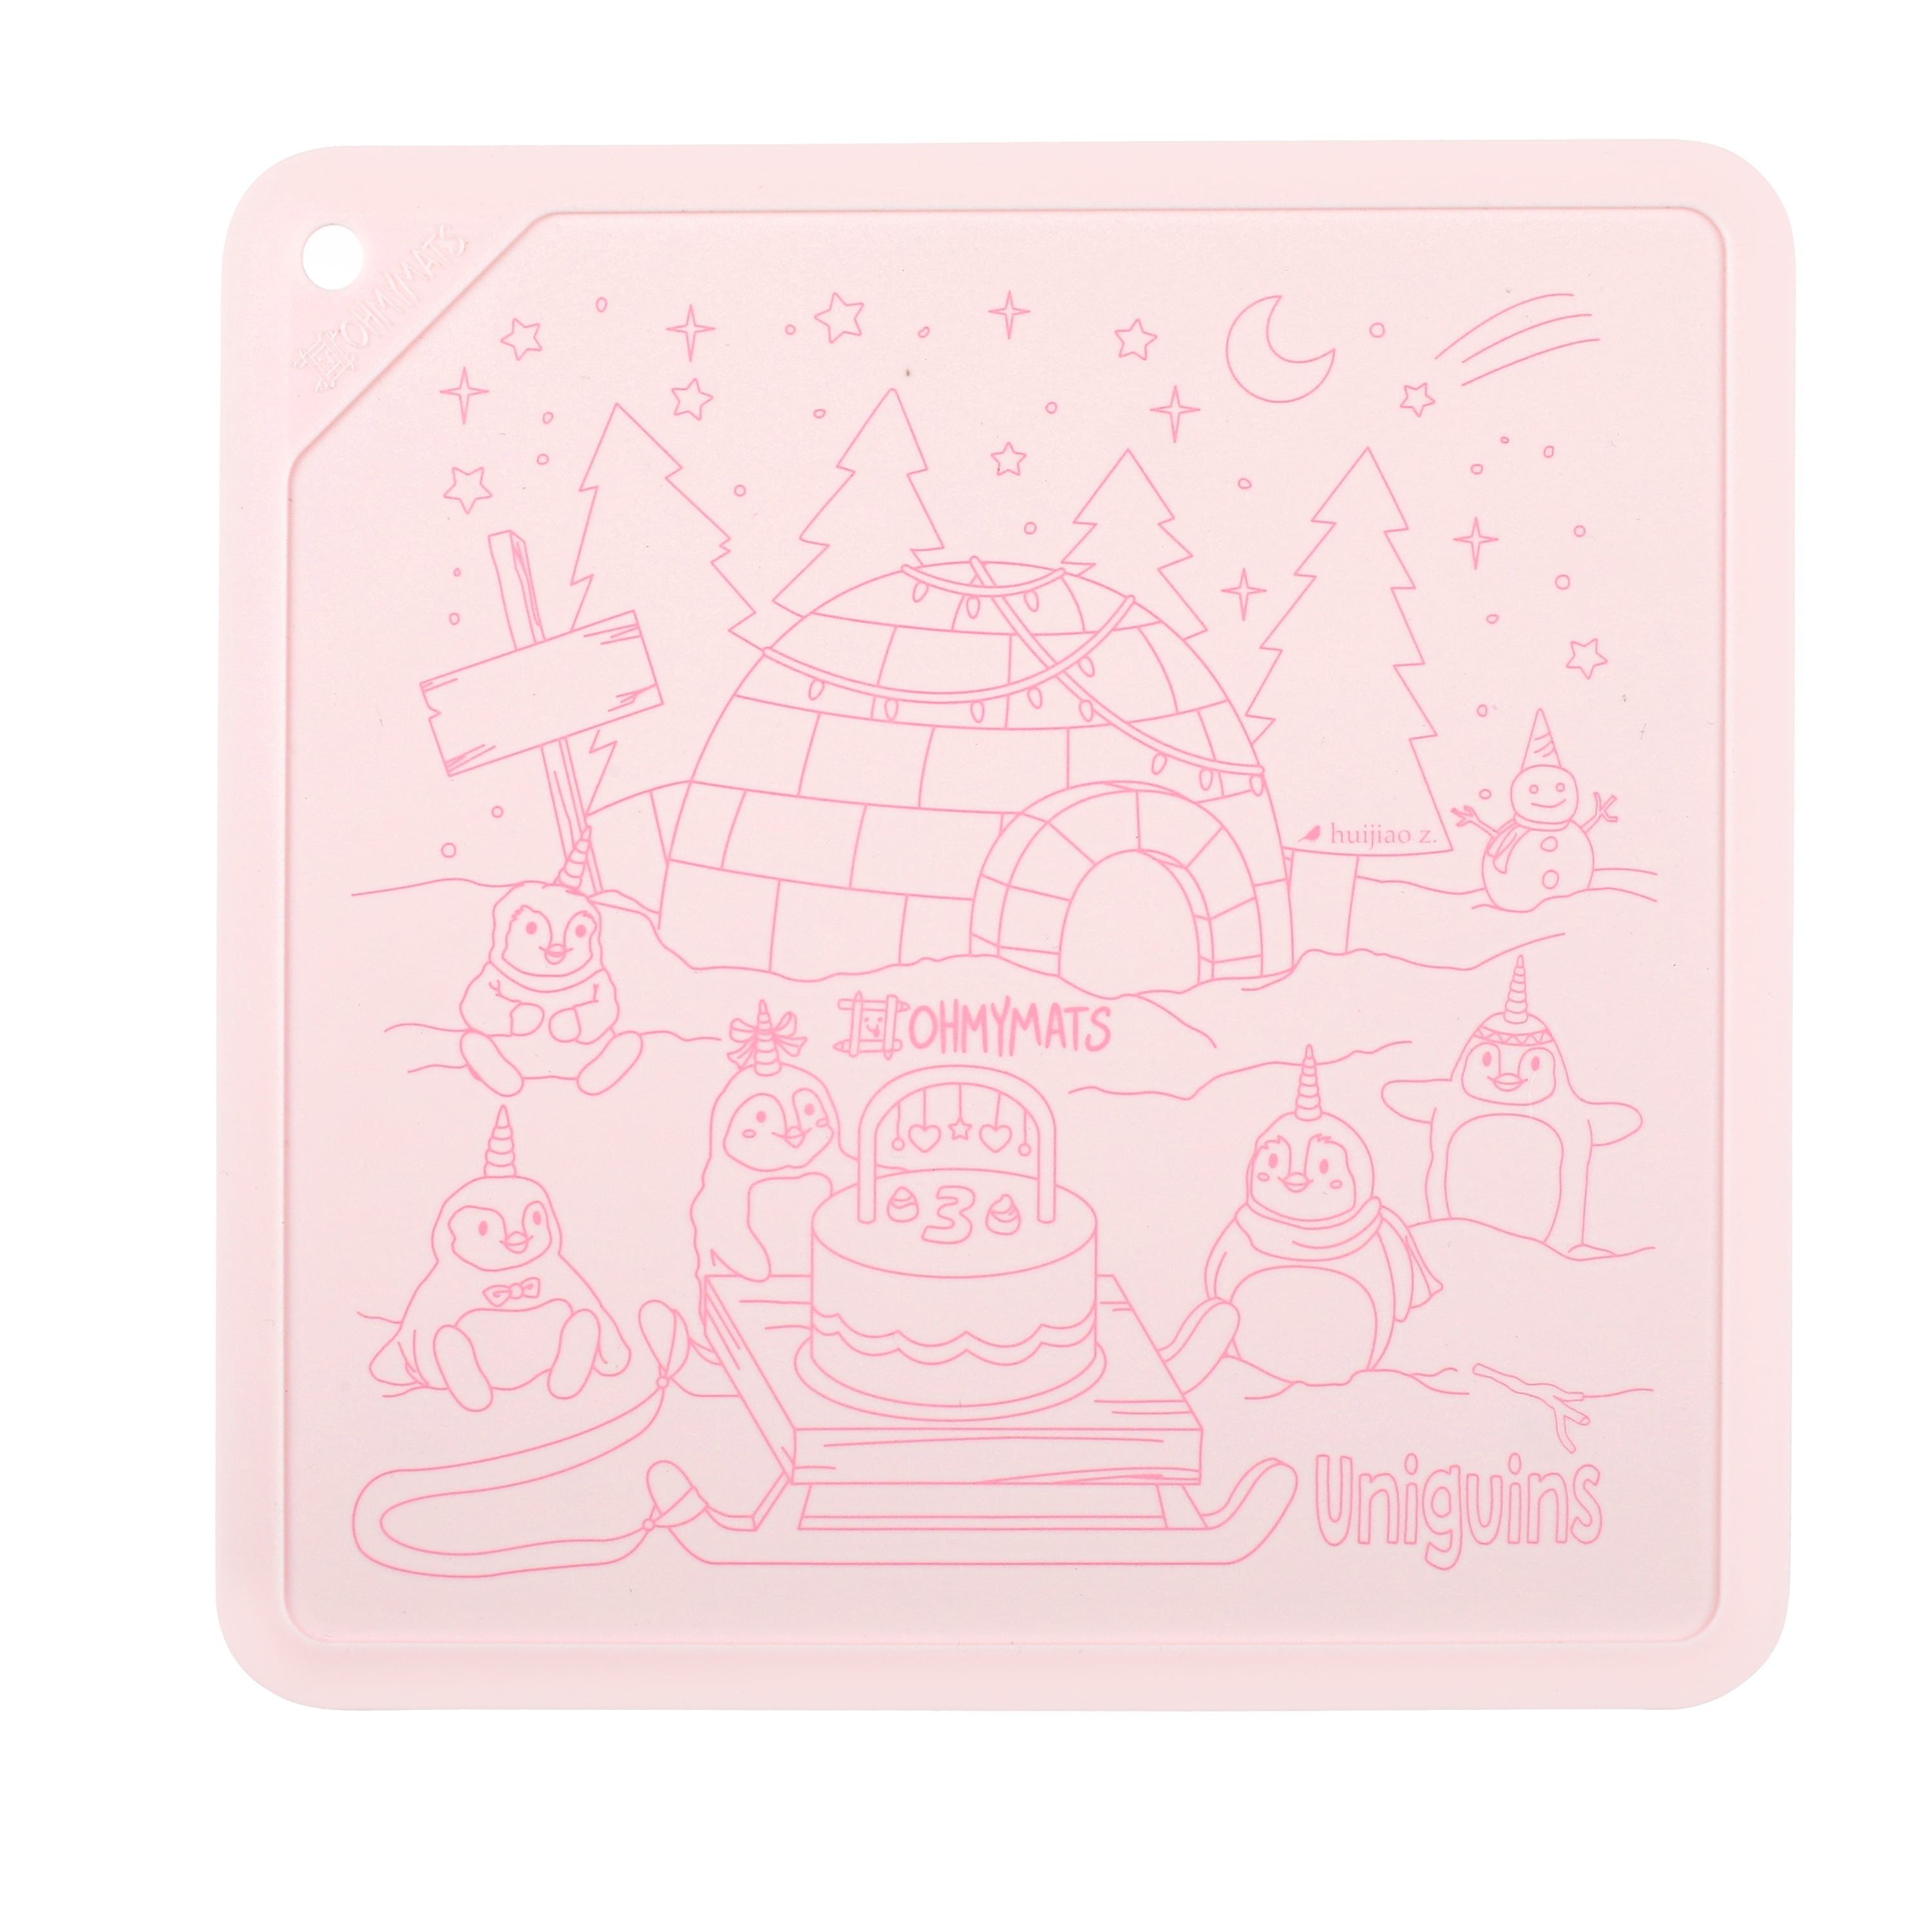 #ohmymats Square Mats - The Pink Series - Uniguins